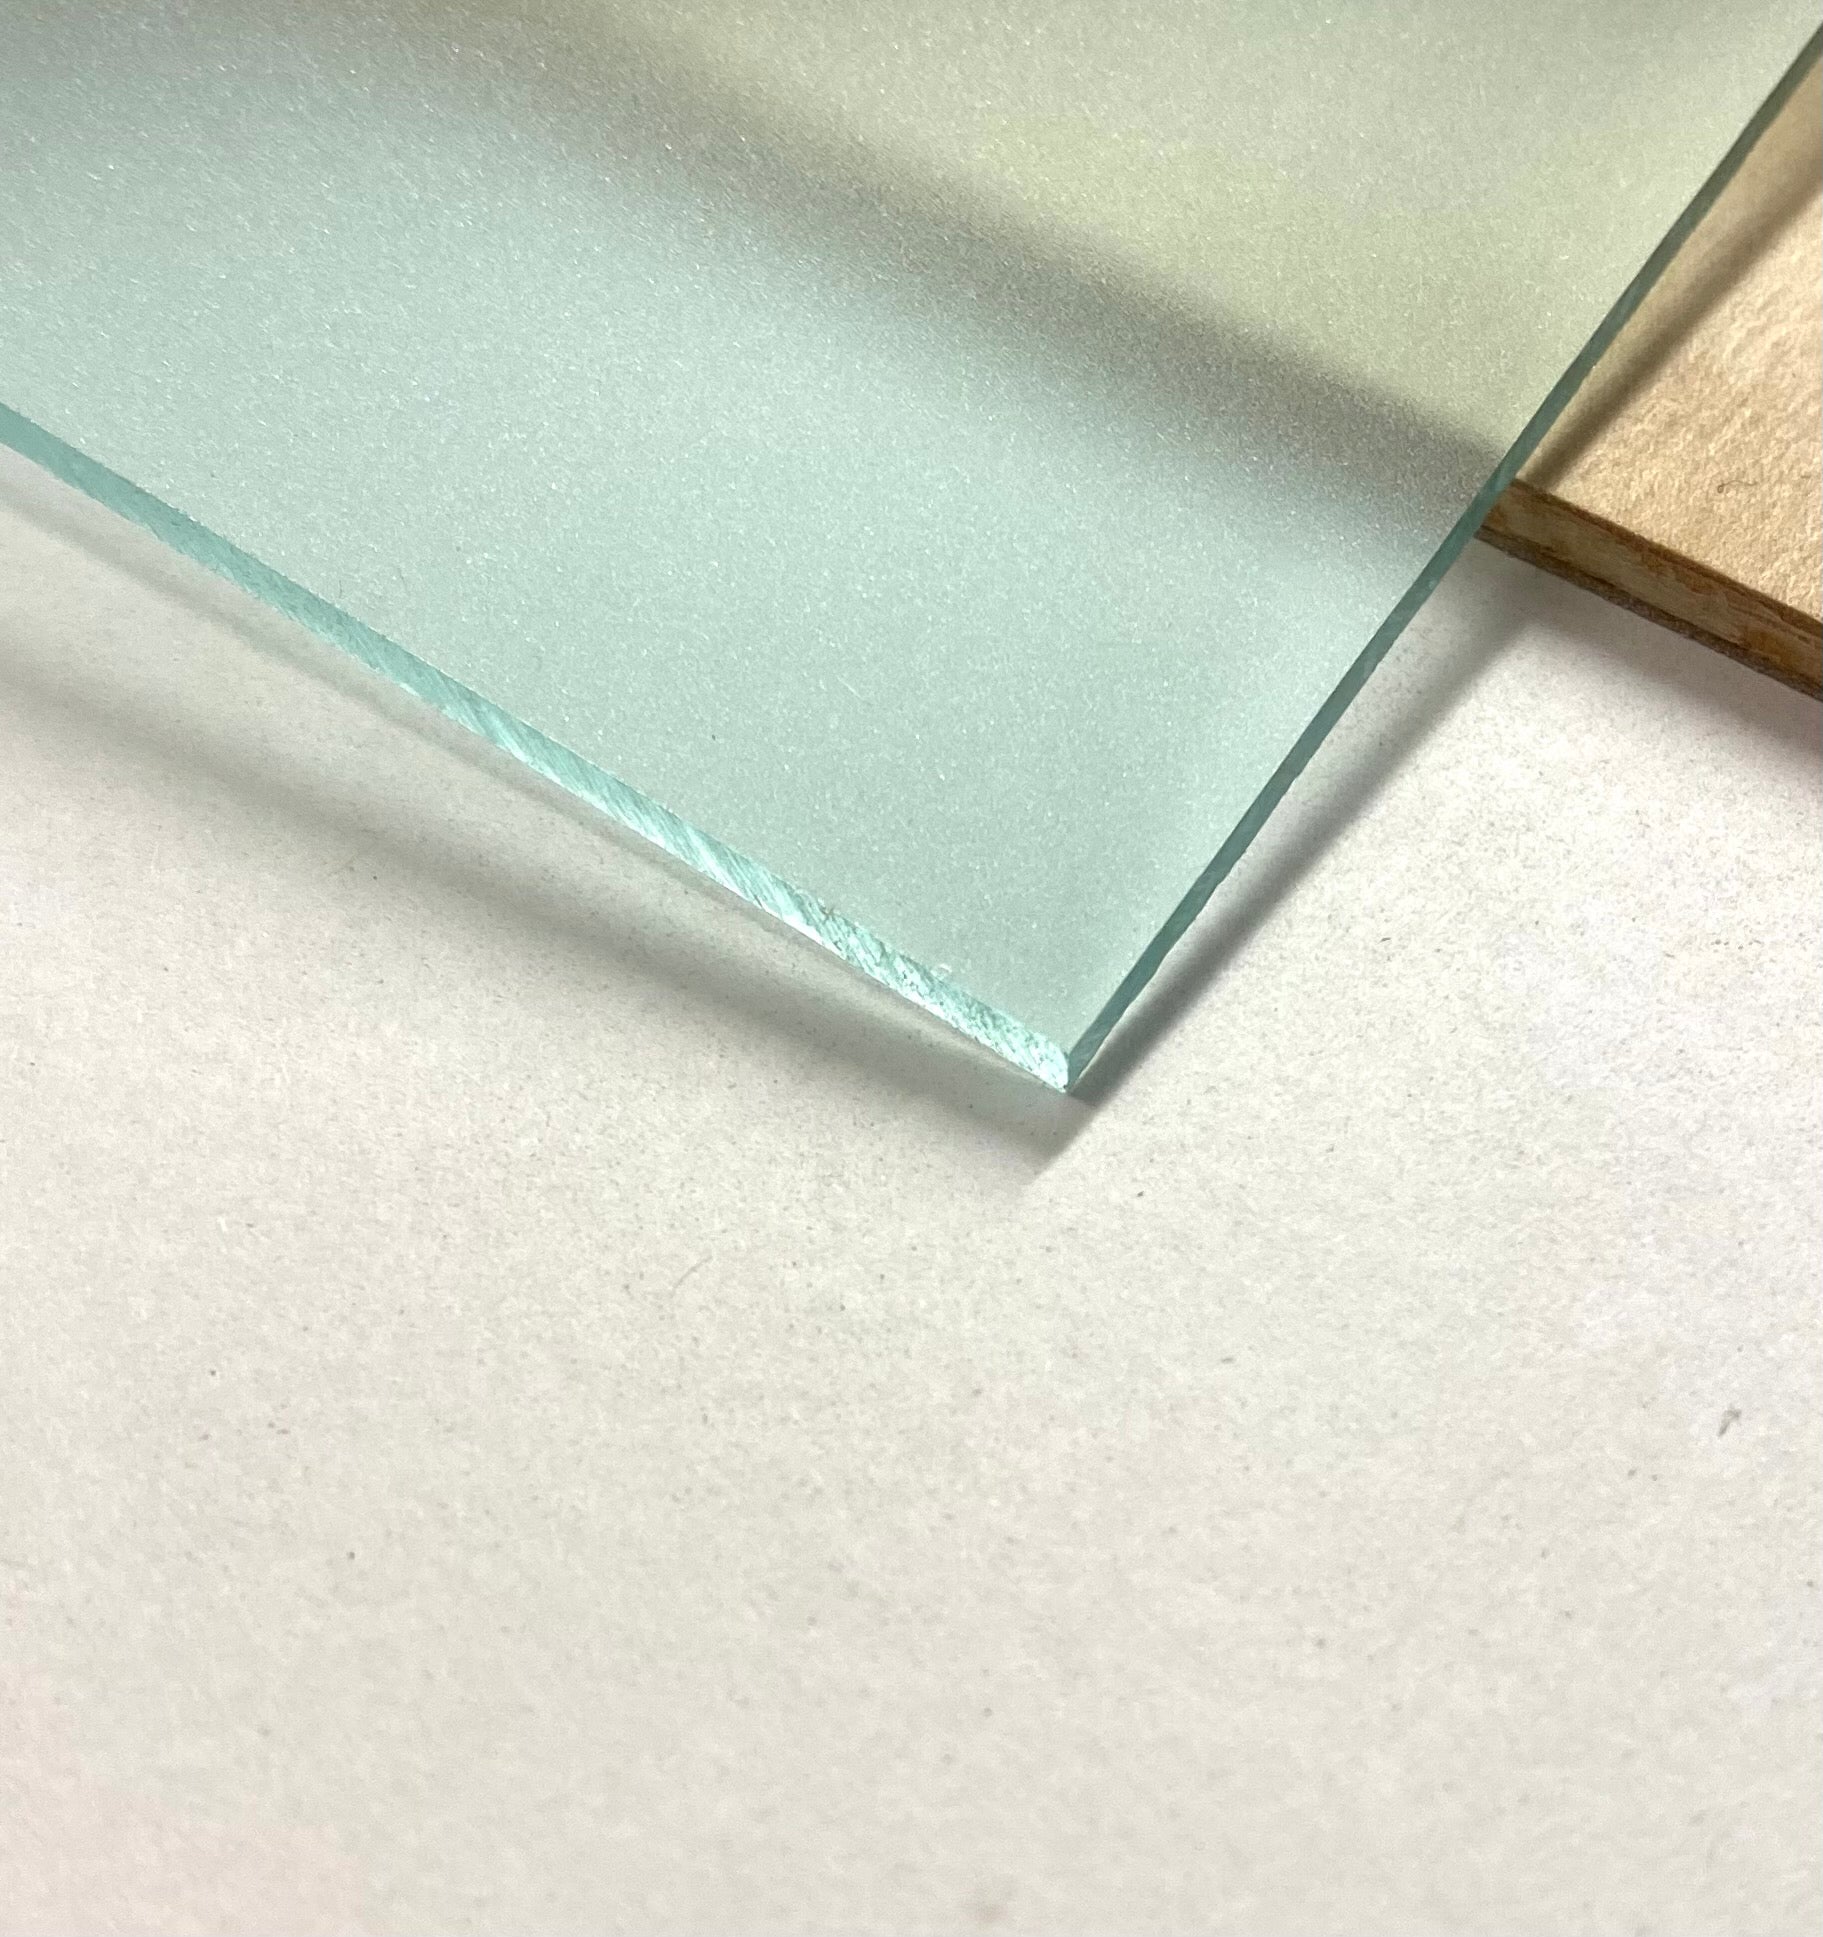 clear glass sheet 10mm,best price clear glass sheet 10mm, 10mm clear glass  sheet company